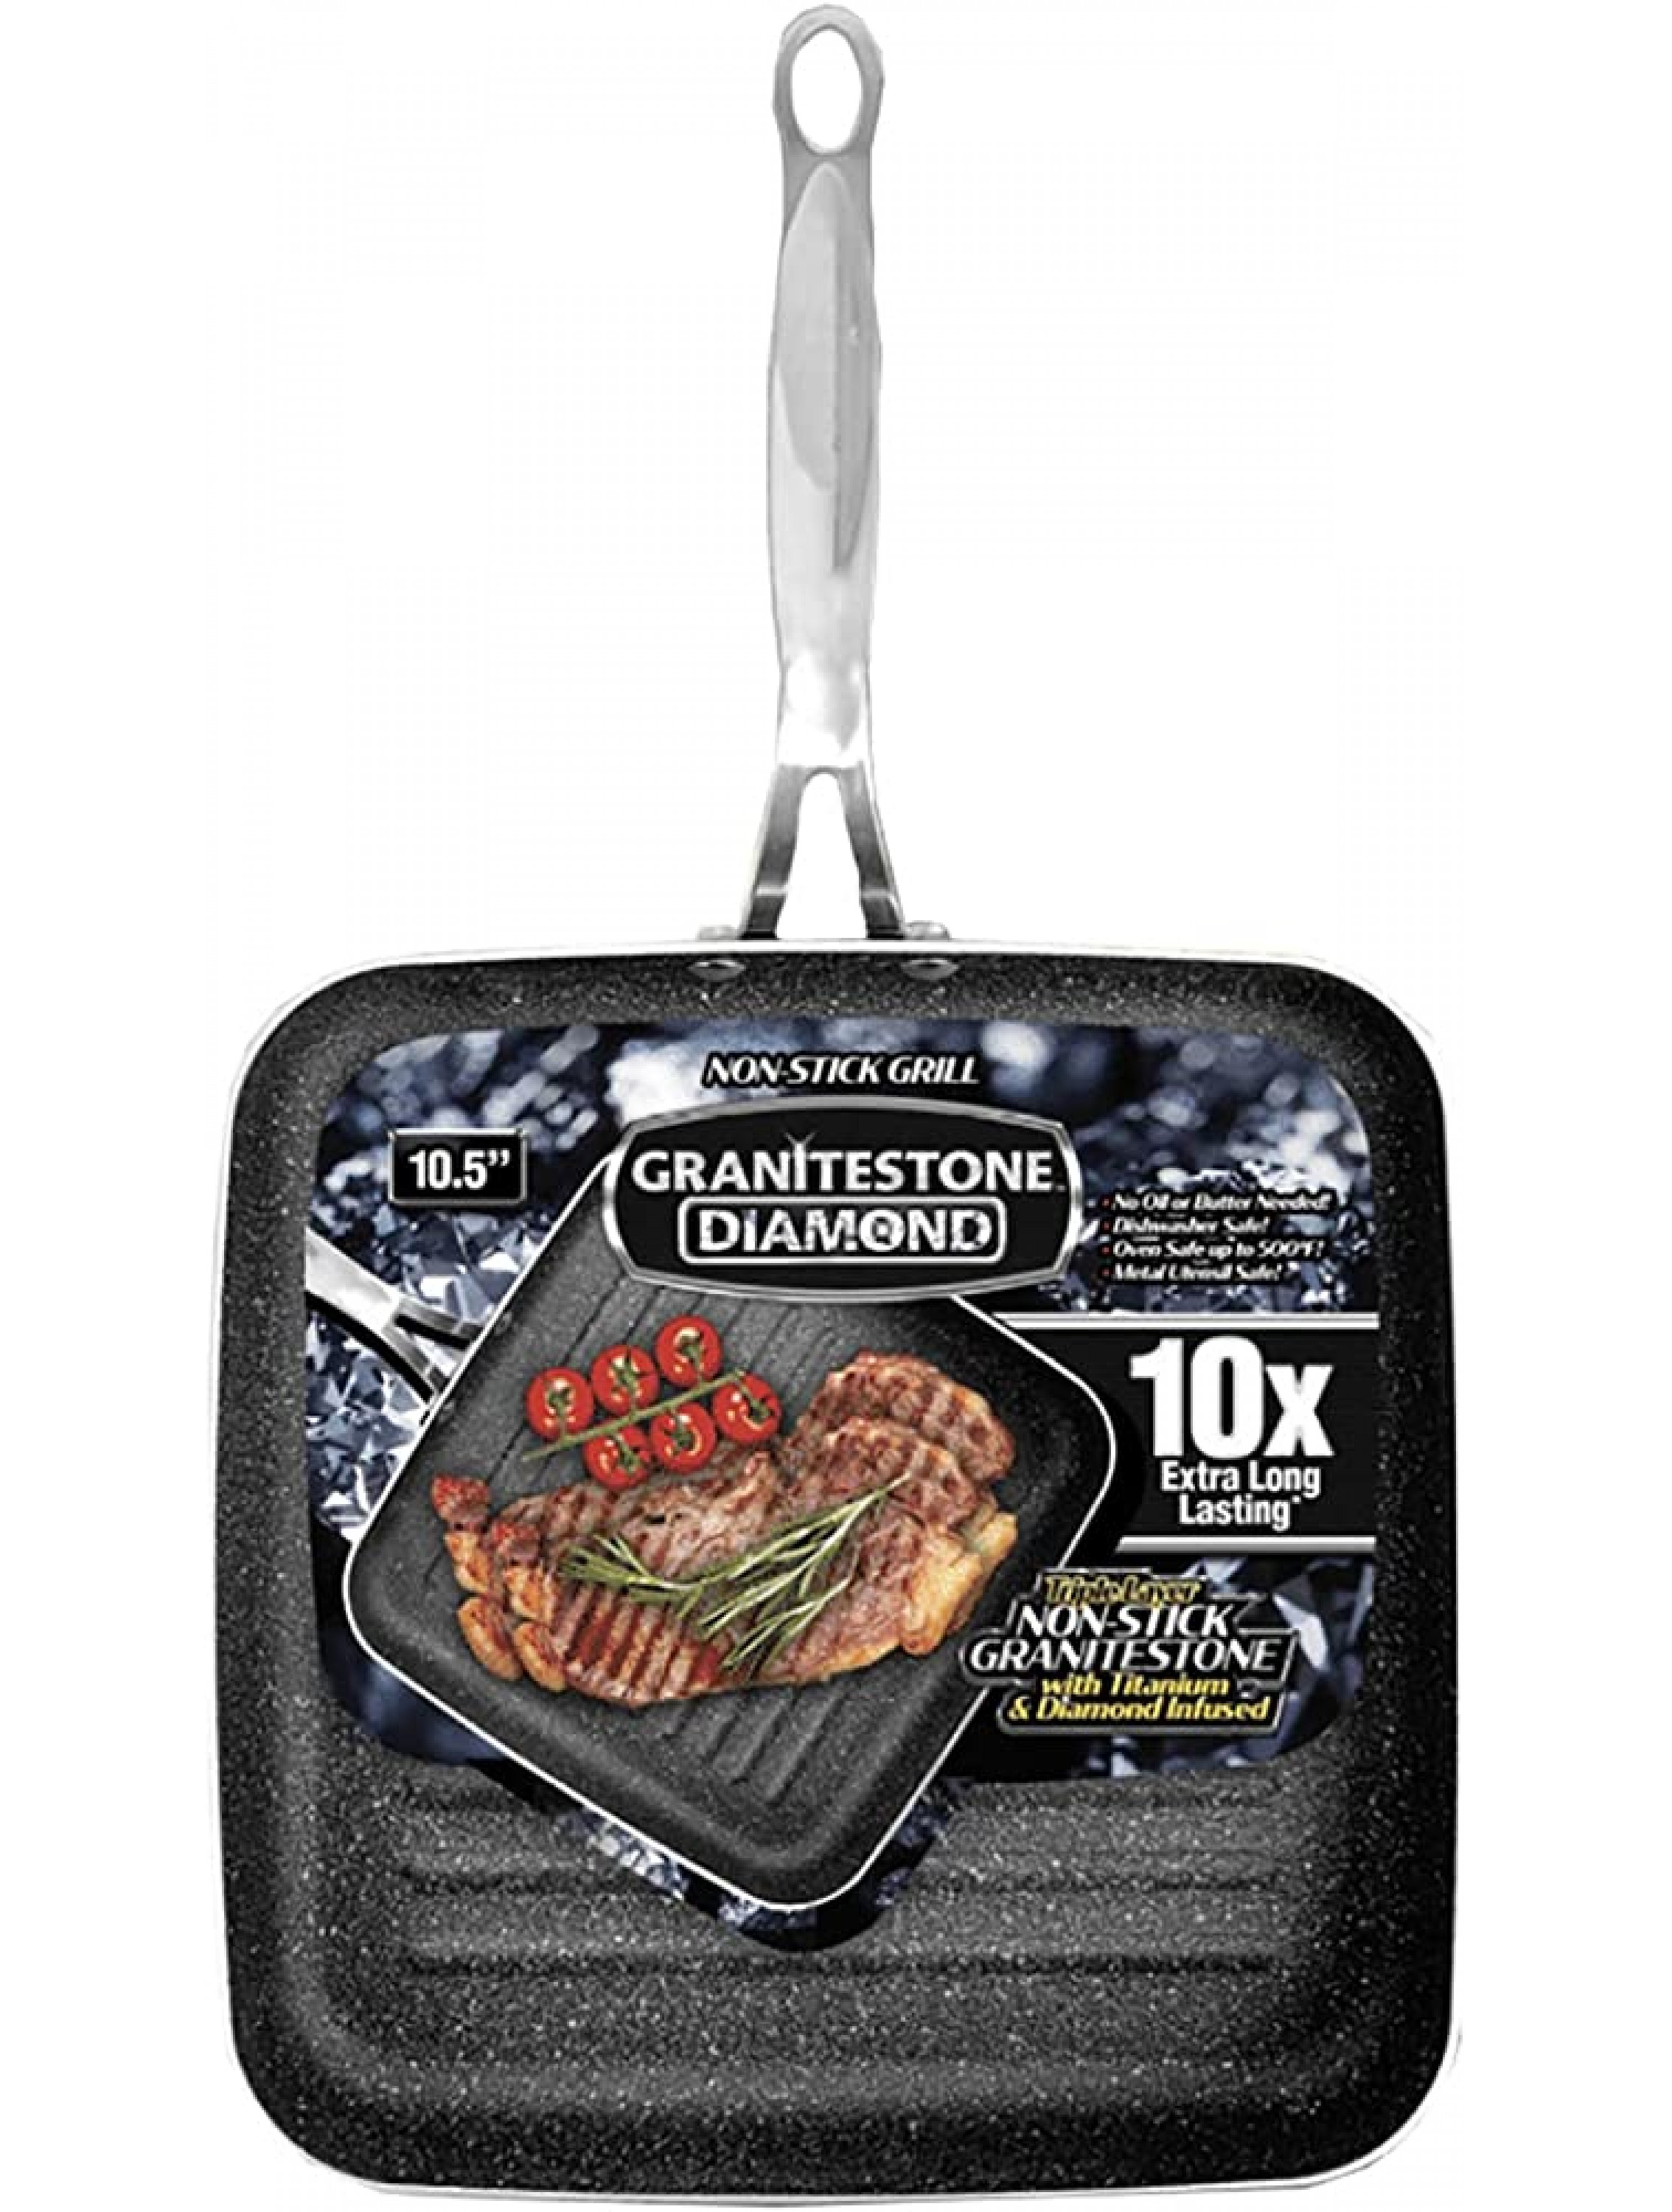 Granitestone Grill Pan 10.25 Nonstick and Scratchproof Stovetop Cookware PFOA Free Oven-Safe Dish Washer Safe 10X Extra Long Lasting As Seen On TV - BY4B7TBKZ